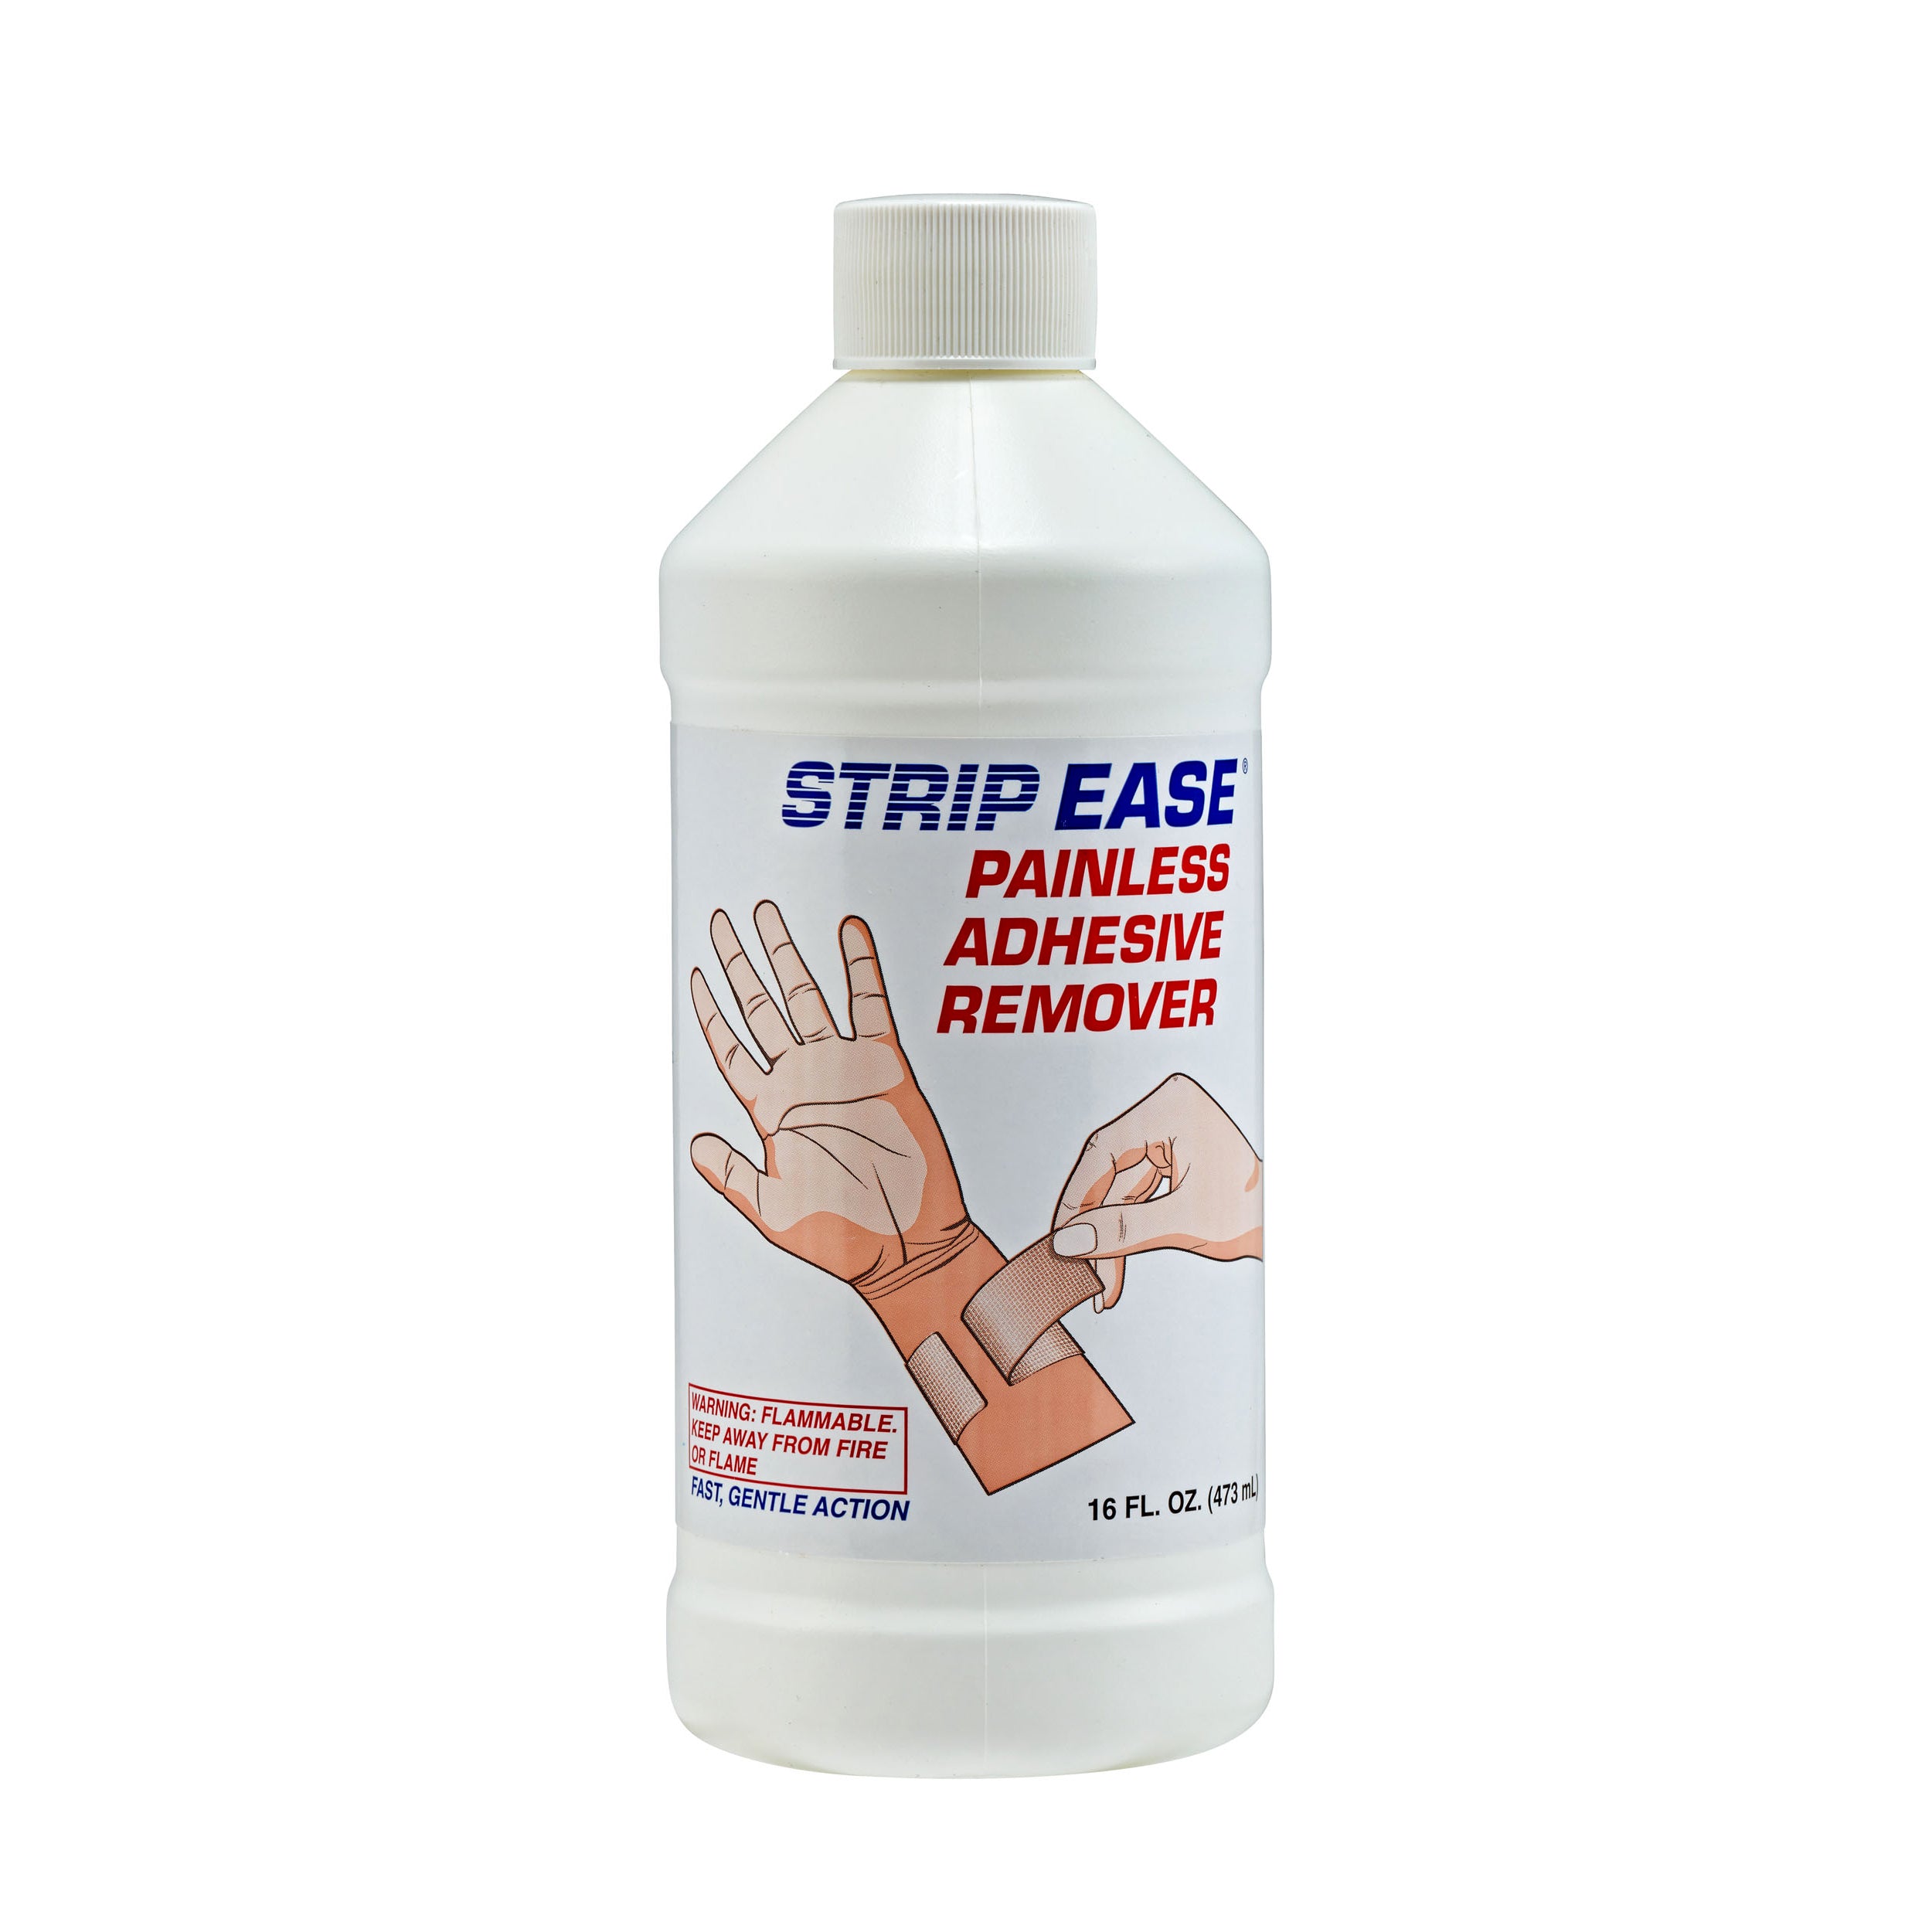 Strip Ease Adhesive Remover